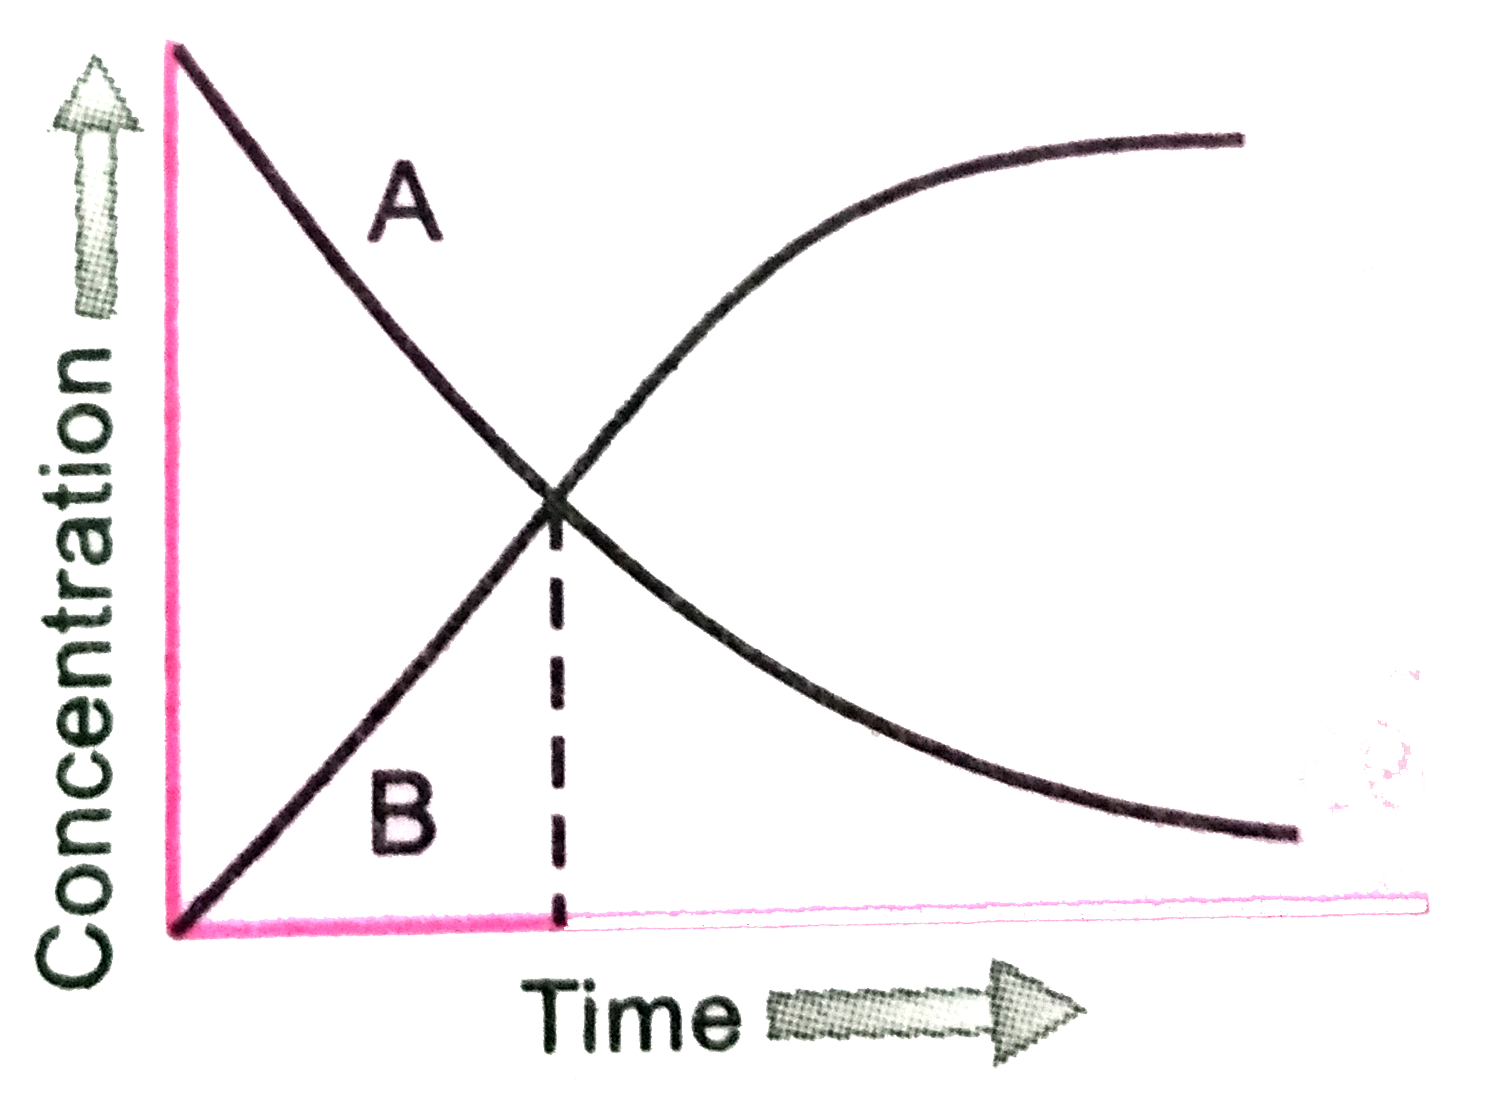 The figure below depicts the change in the concentration of the species A and B for the reaction A to B, as a function of time. The point of intersection of the two curves represents